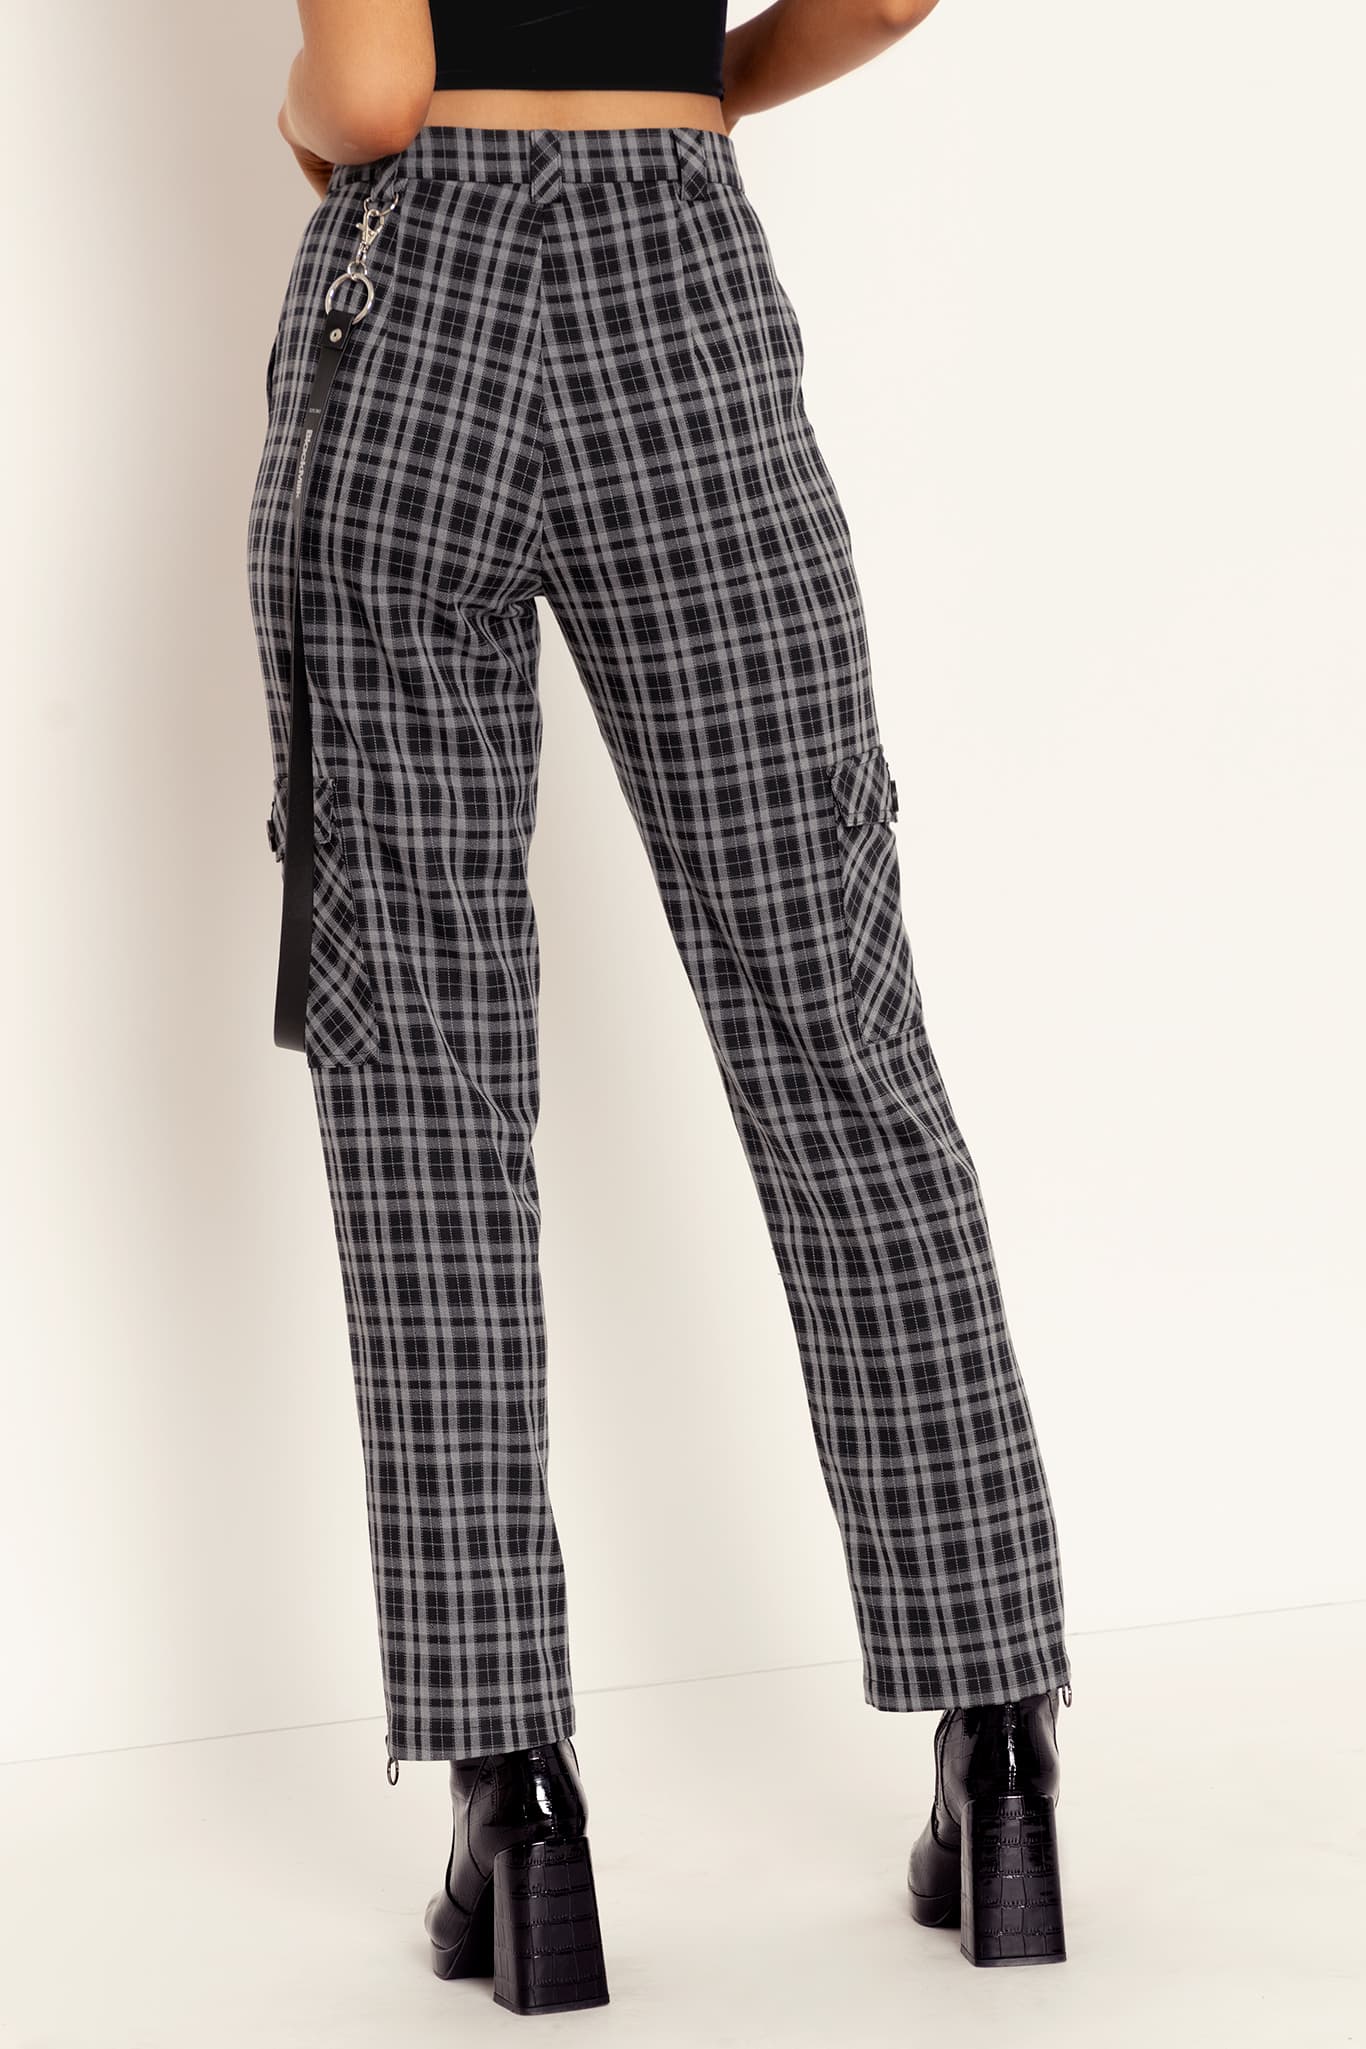 Women's Checkered Fashion Pants and Leggings - Up to 75% OFF - Buy Checkered  Fashion Pants and Leggings for Women Online - Kuwait city, other cities,  Kuwait - Namshi